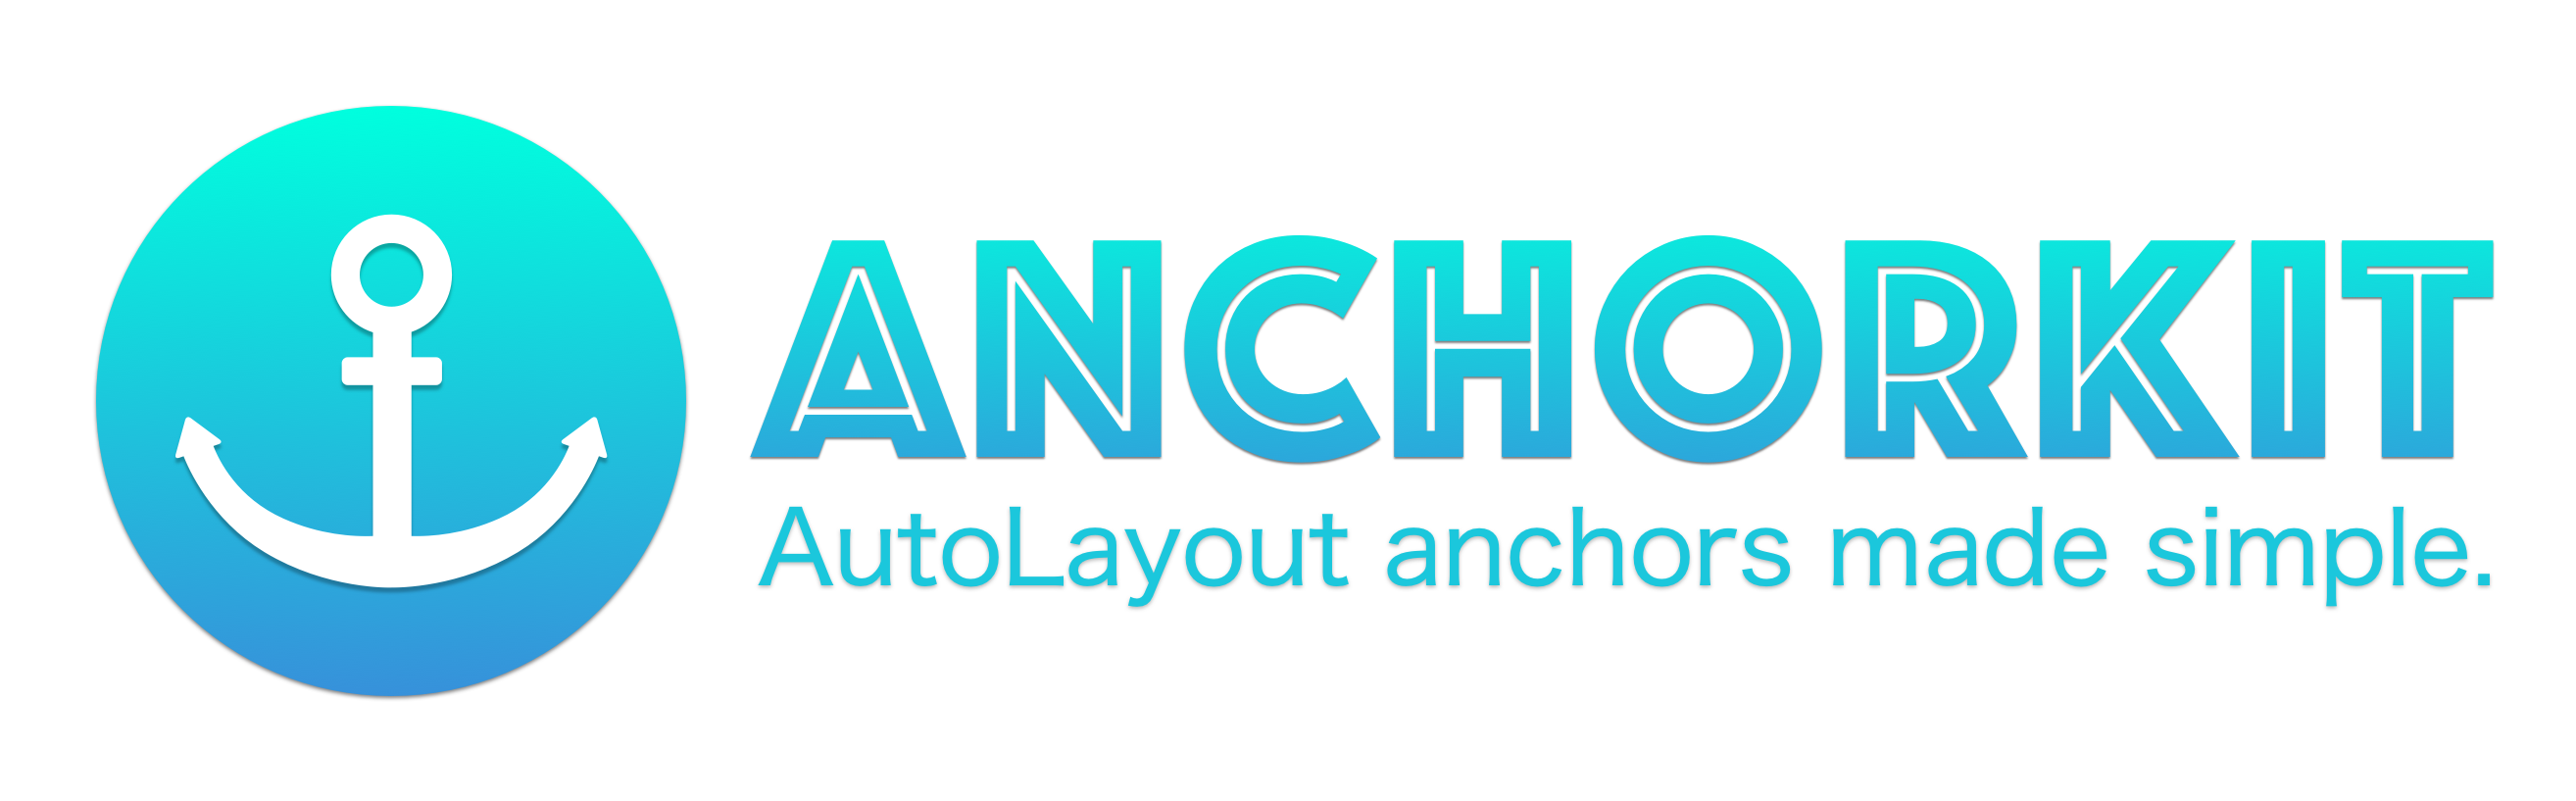 AnchorKit